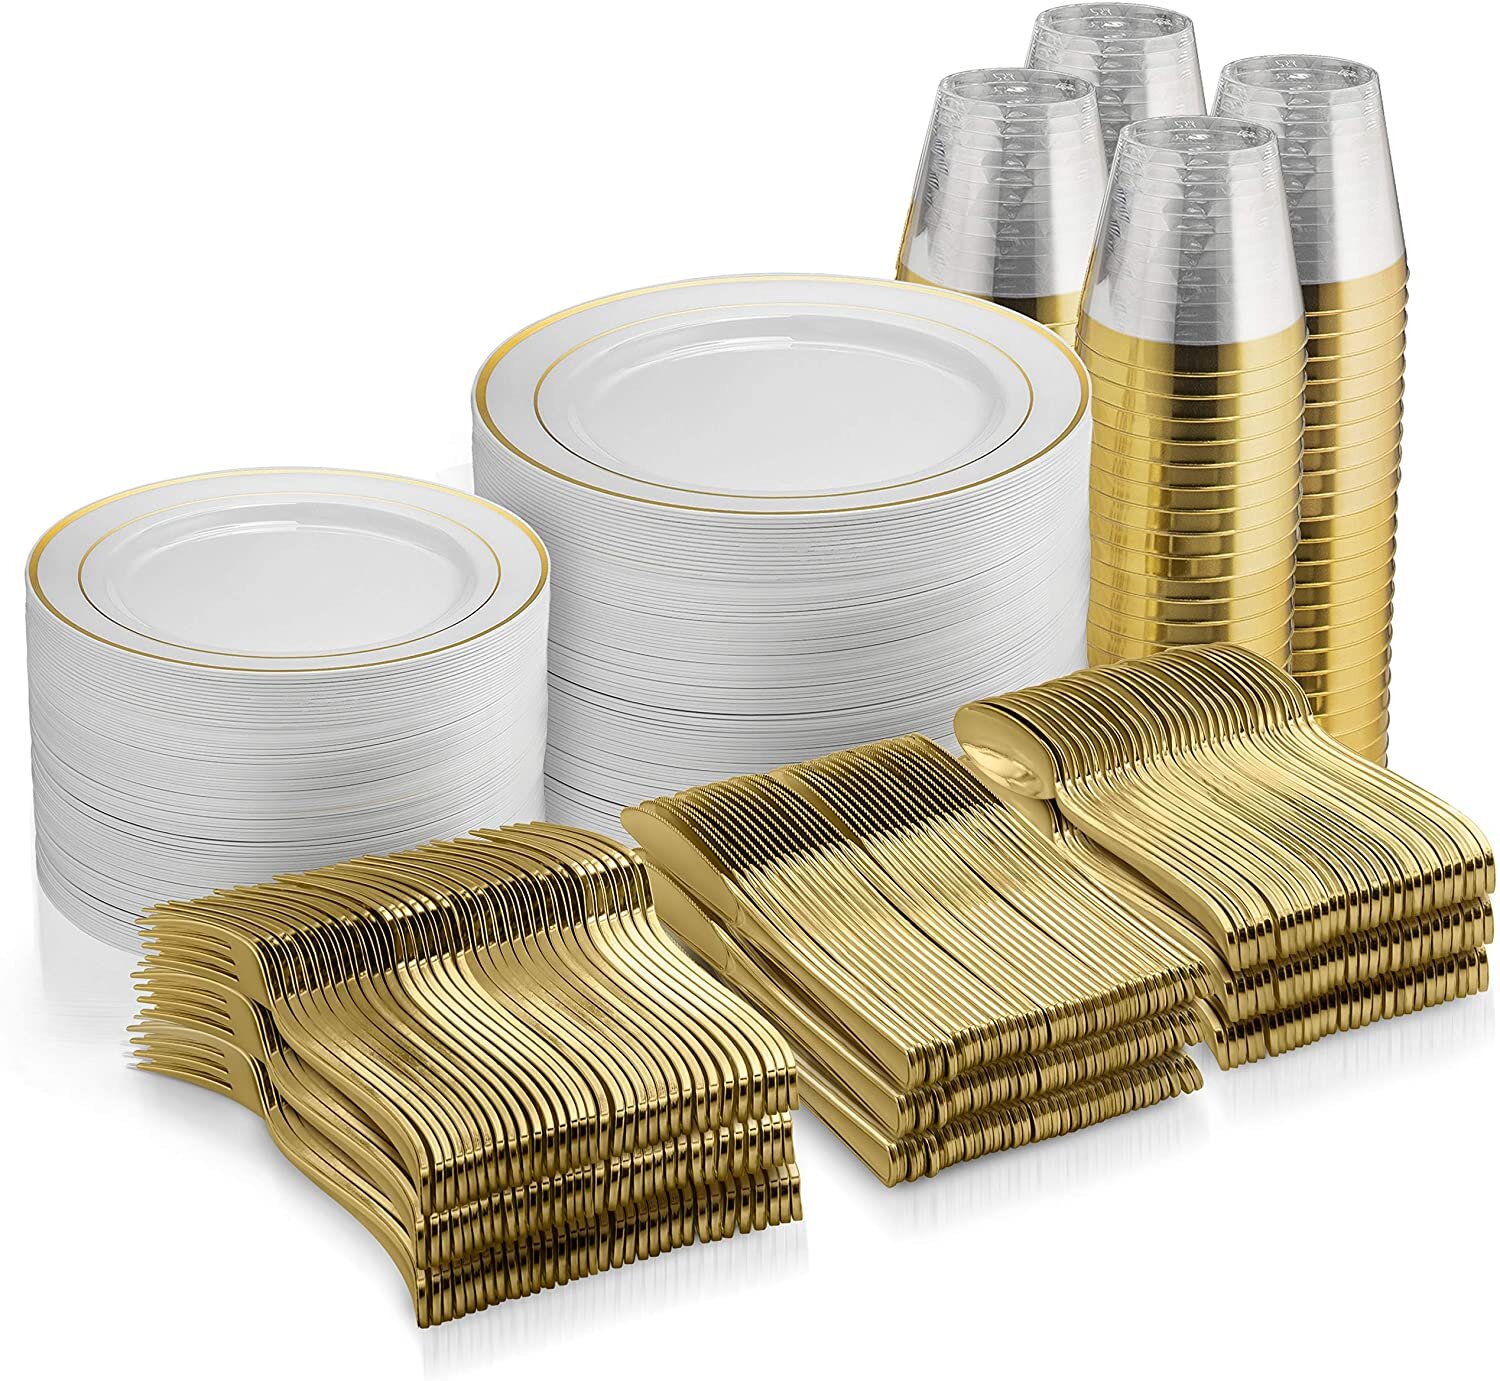 150 Pieces Gold Disposable Plates for 25 Guests, Plastic Party, Wedding,  Dinnerware Set of Dinner Plates, Salad Spoons, Forks, Knives, Cups